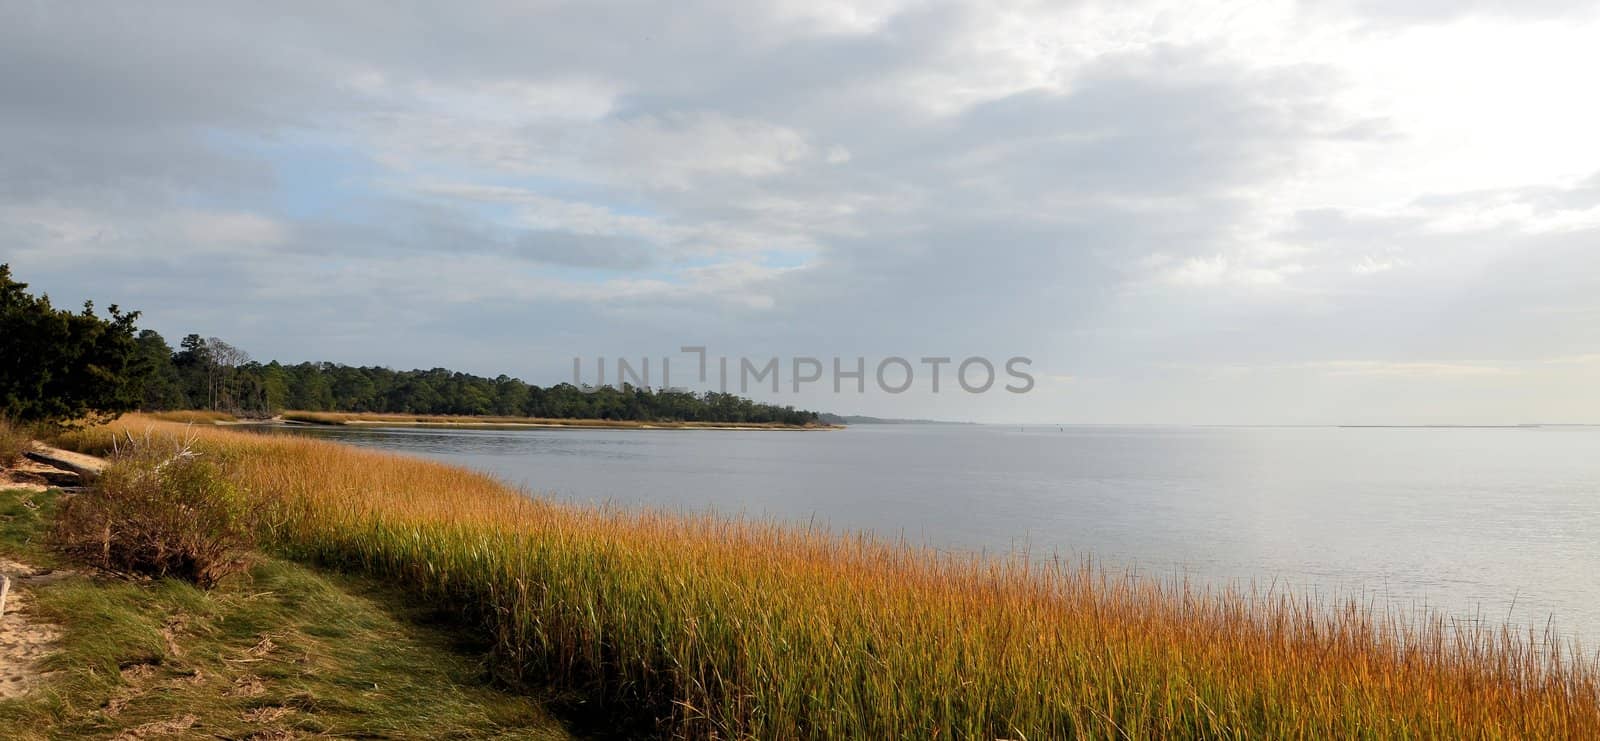 Along the shore in North Carolina with a grass blowing in the breeze. Colors include green, gold and blue.